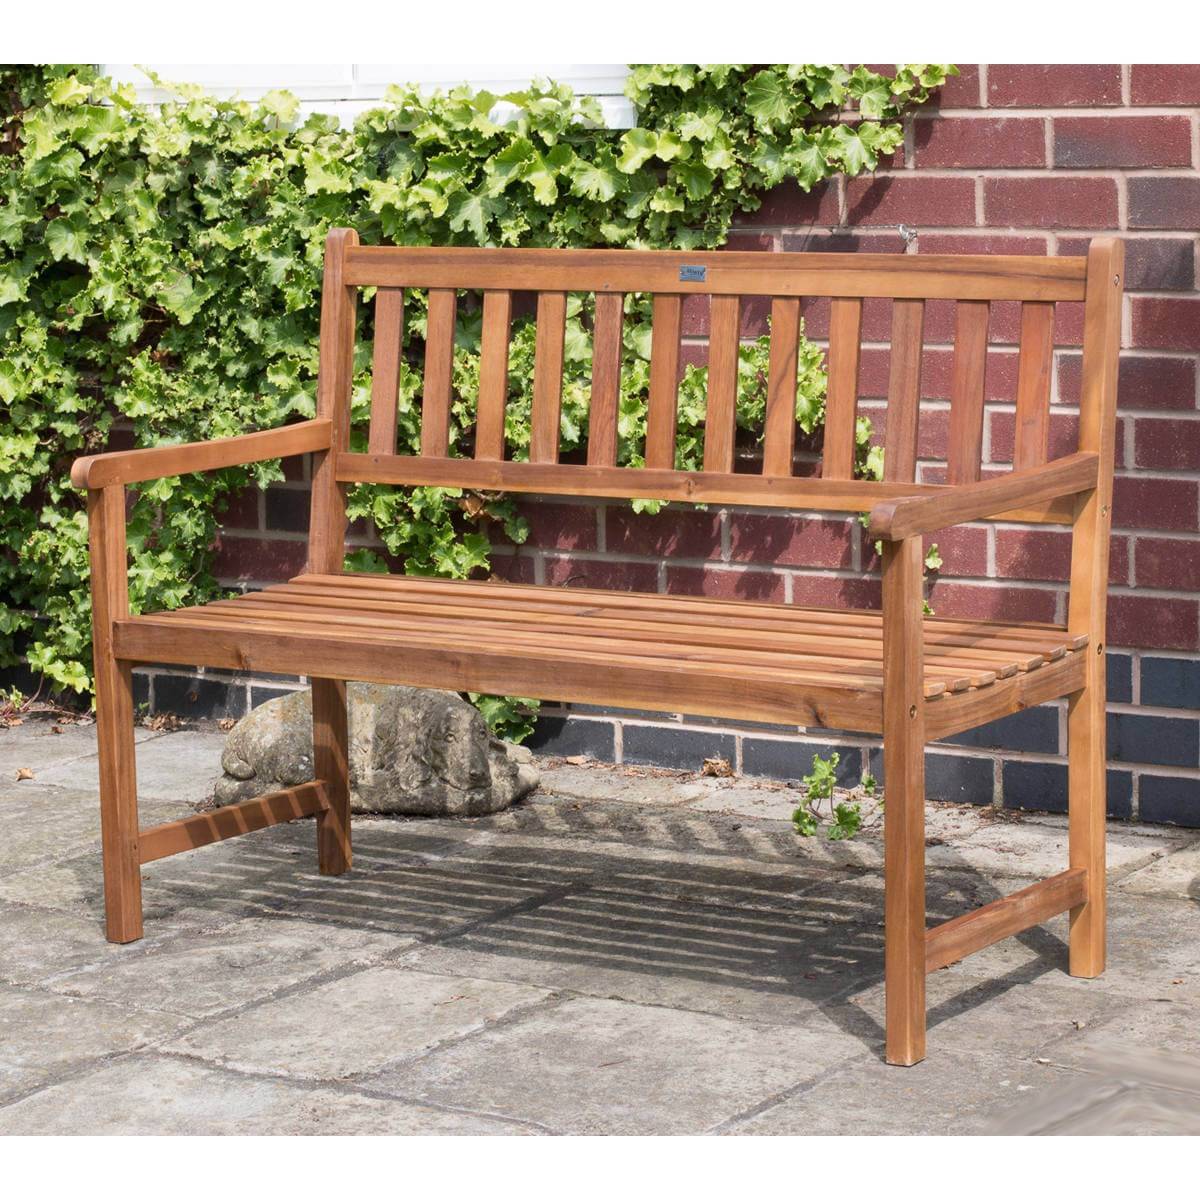 Classic English Garden Bench Seat Bright Manufacturing